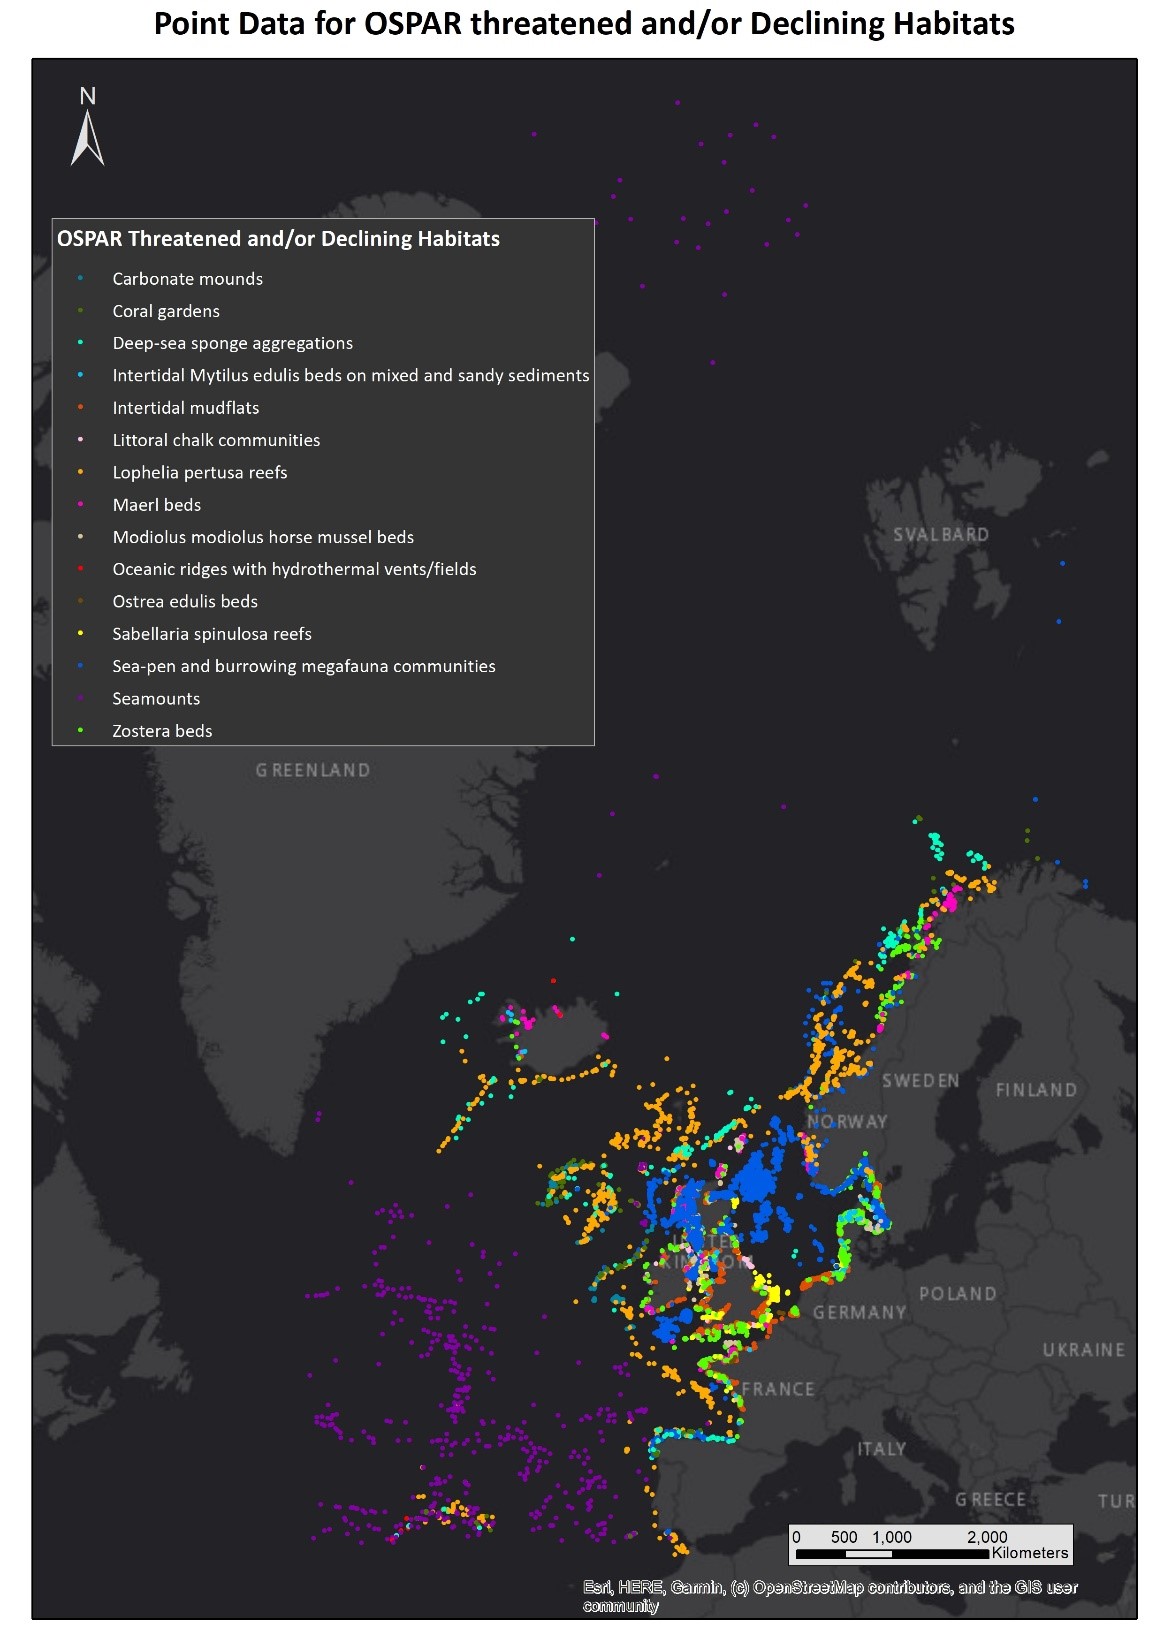 Point distribution data for OSPAR Threatened and/or Declining Habitats